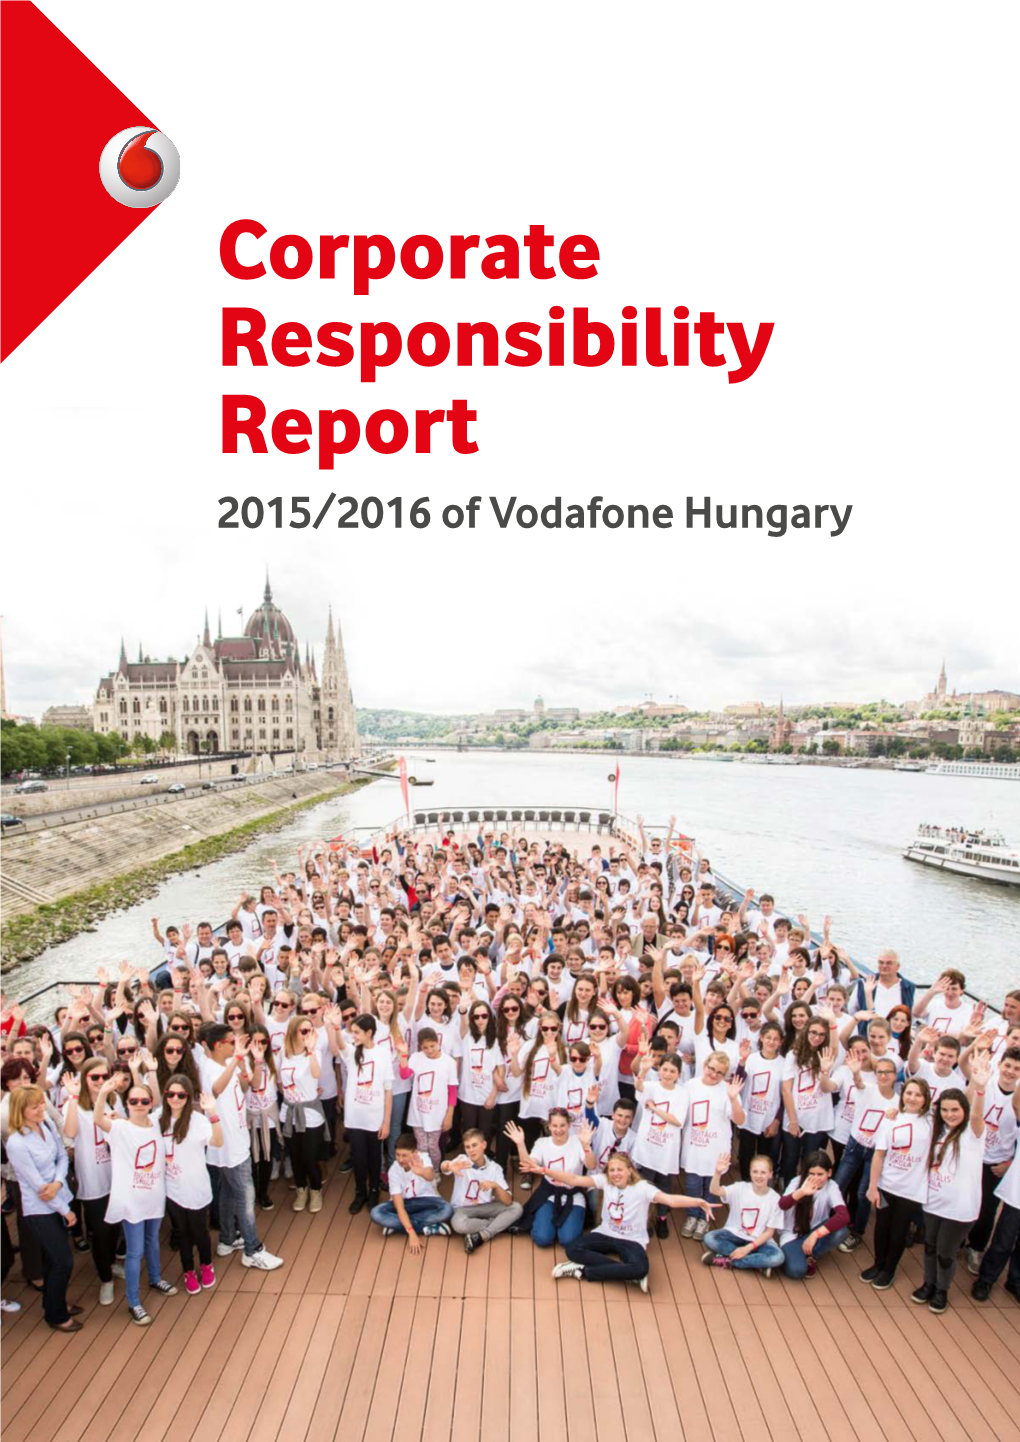 Corporate Responsibility Report 2015/2016 of Vodafone Hungary